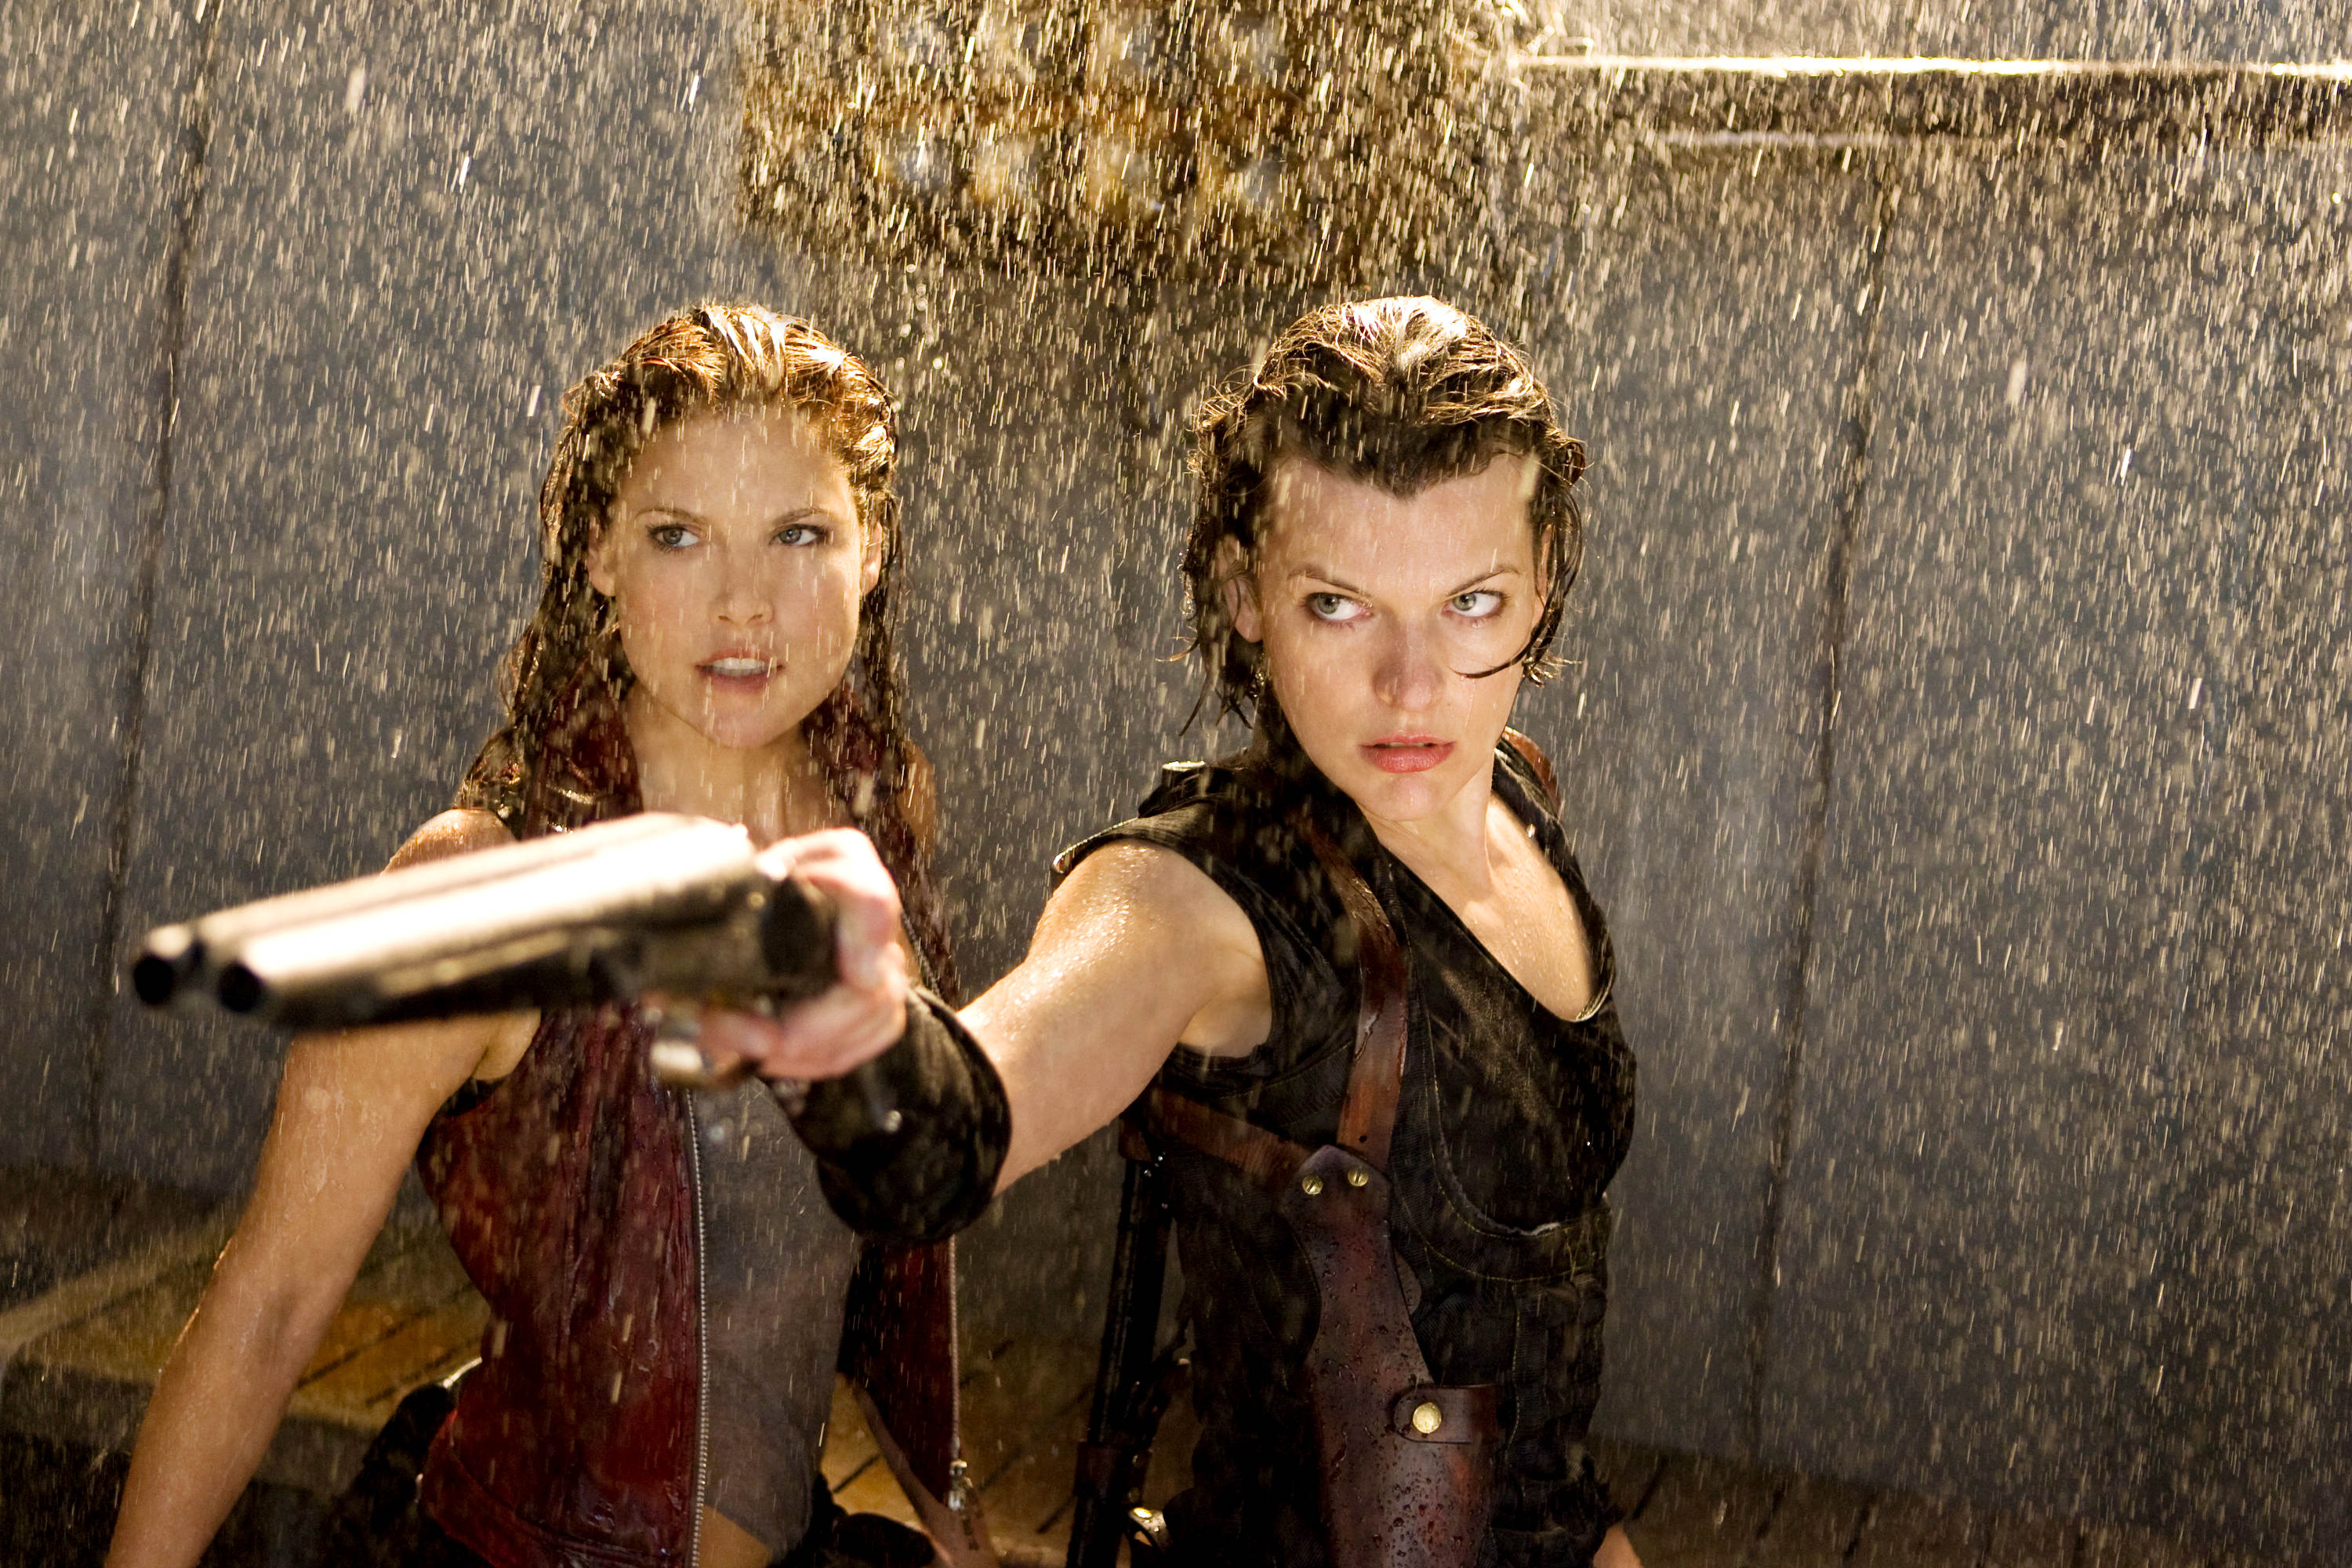 Ali Larter stars as Claire Redfield and Milla Jovovich stars as Alice in Screen Gems' Resident Evil: Afterlife (2010)